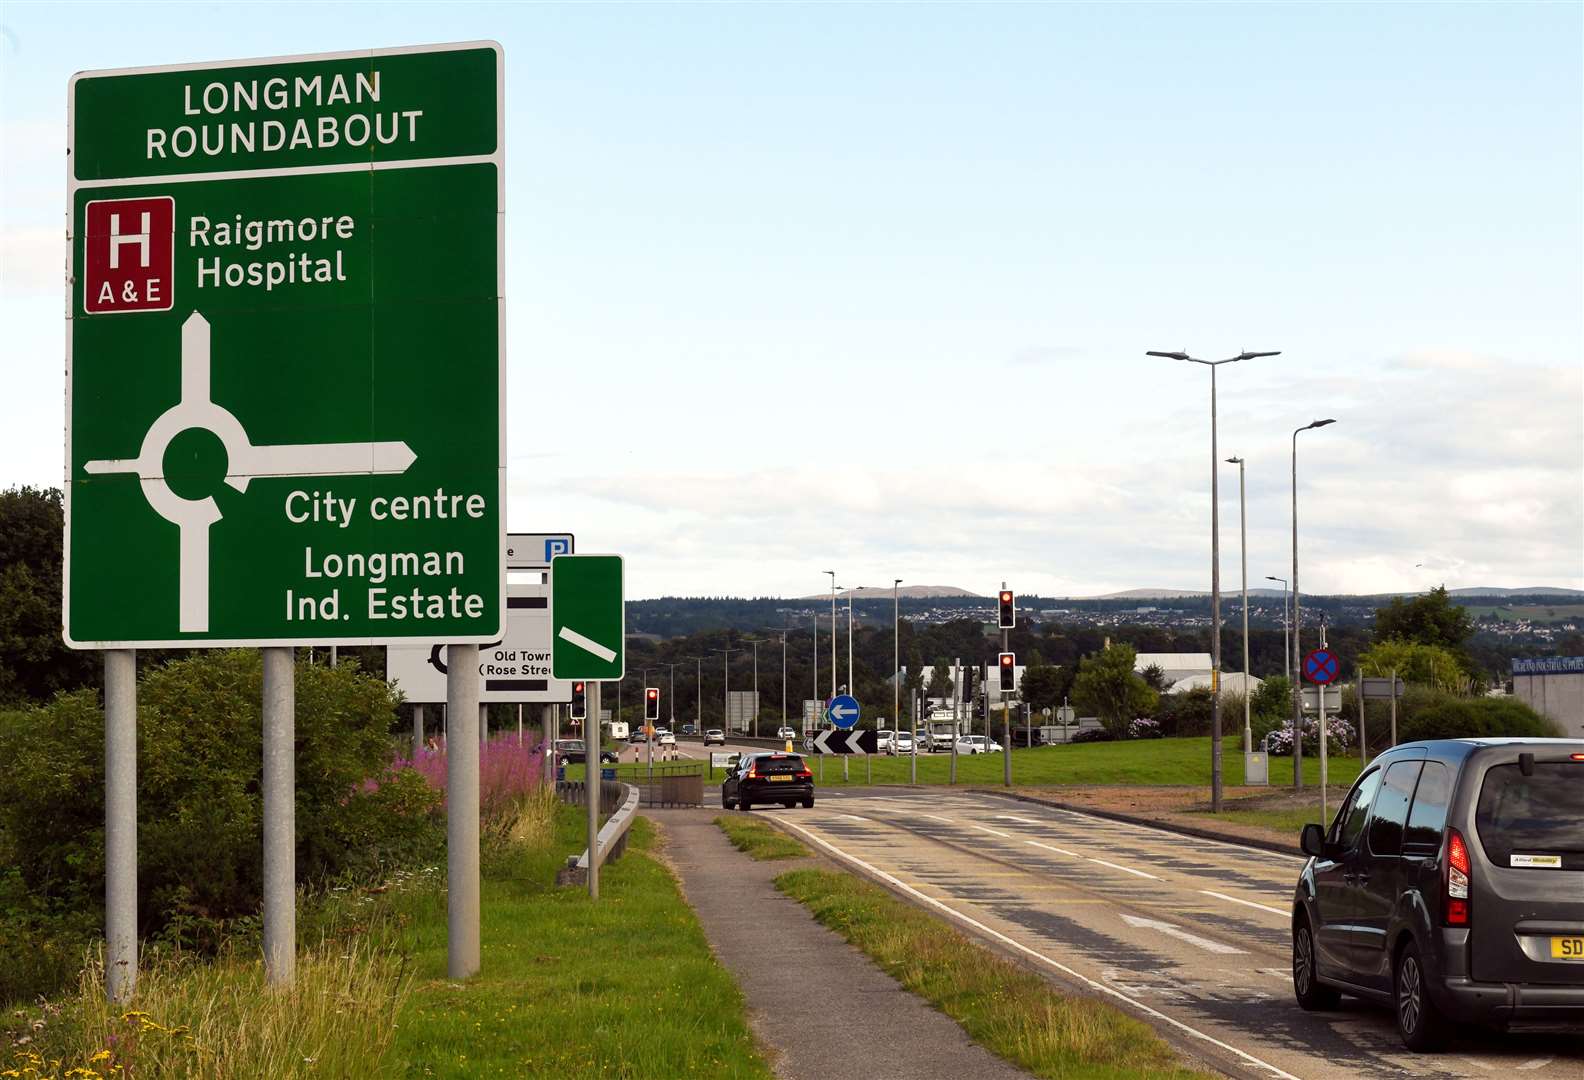 Plans have been put forward to improve the Longman Roundabout.